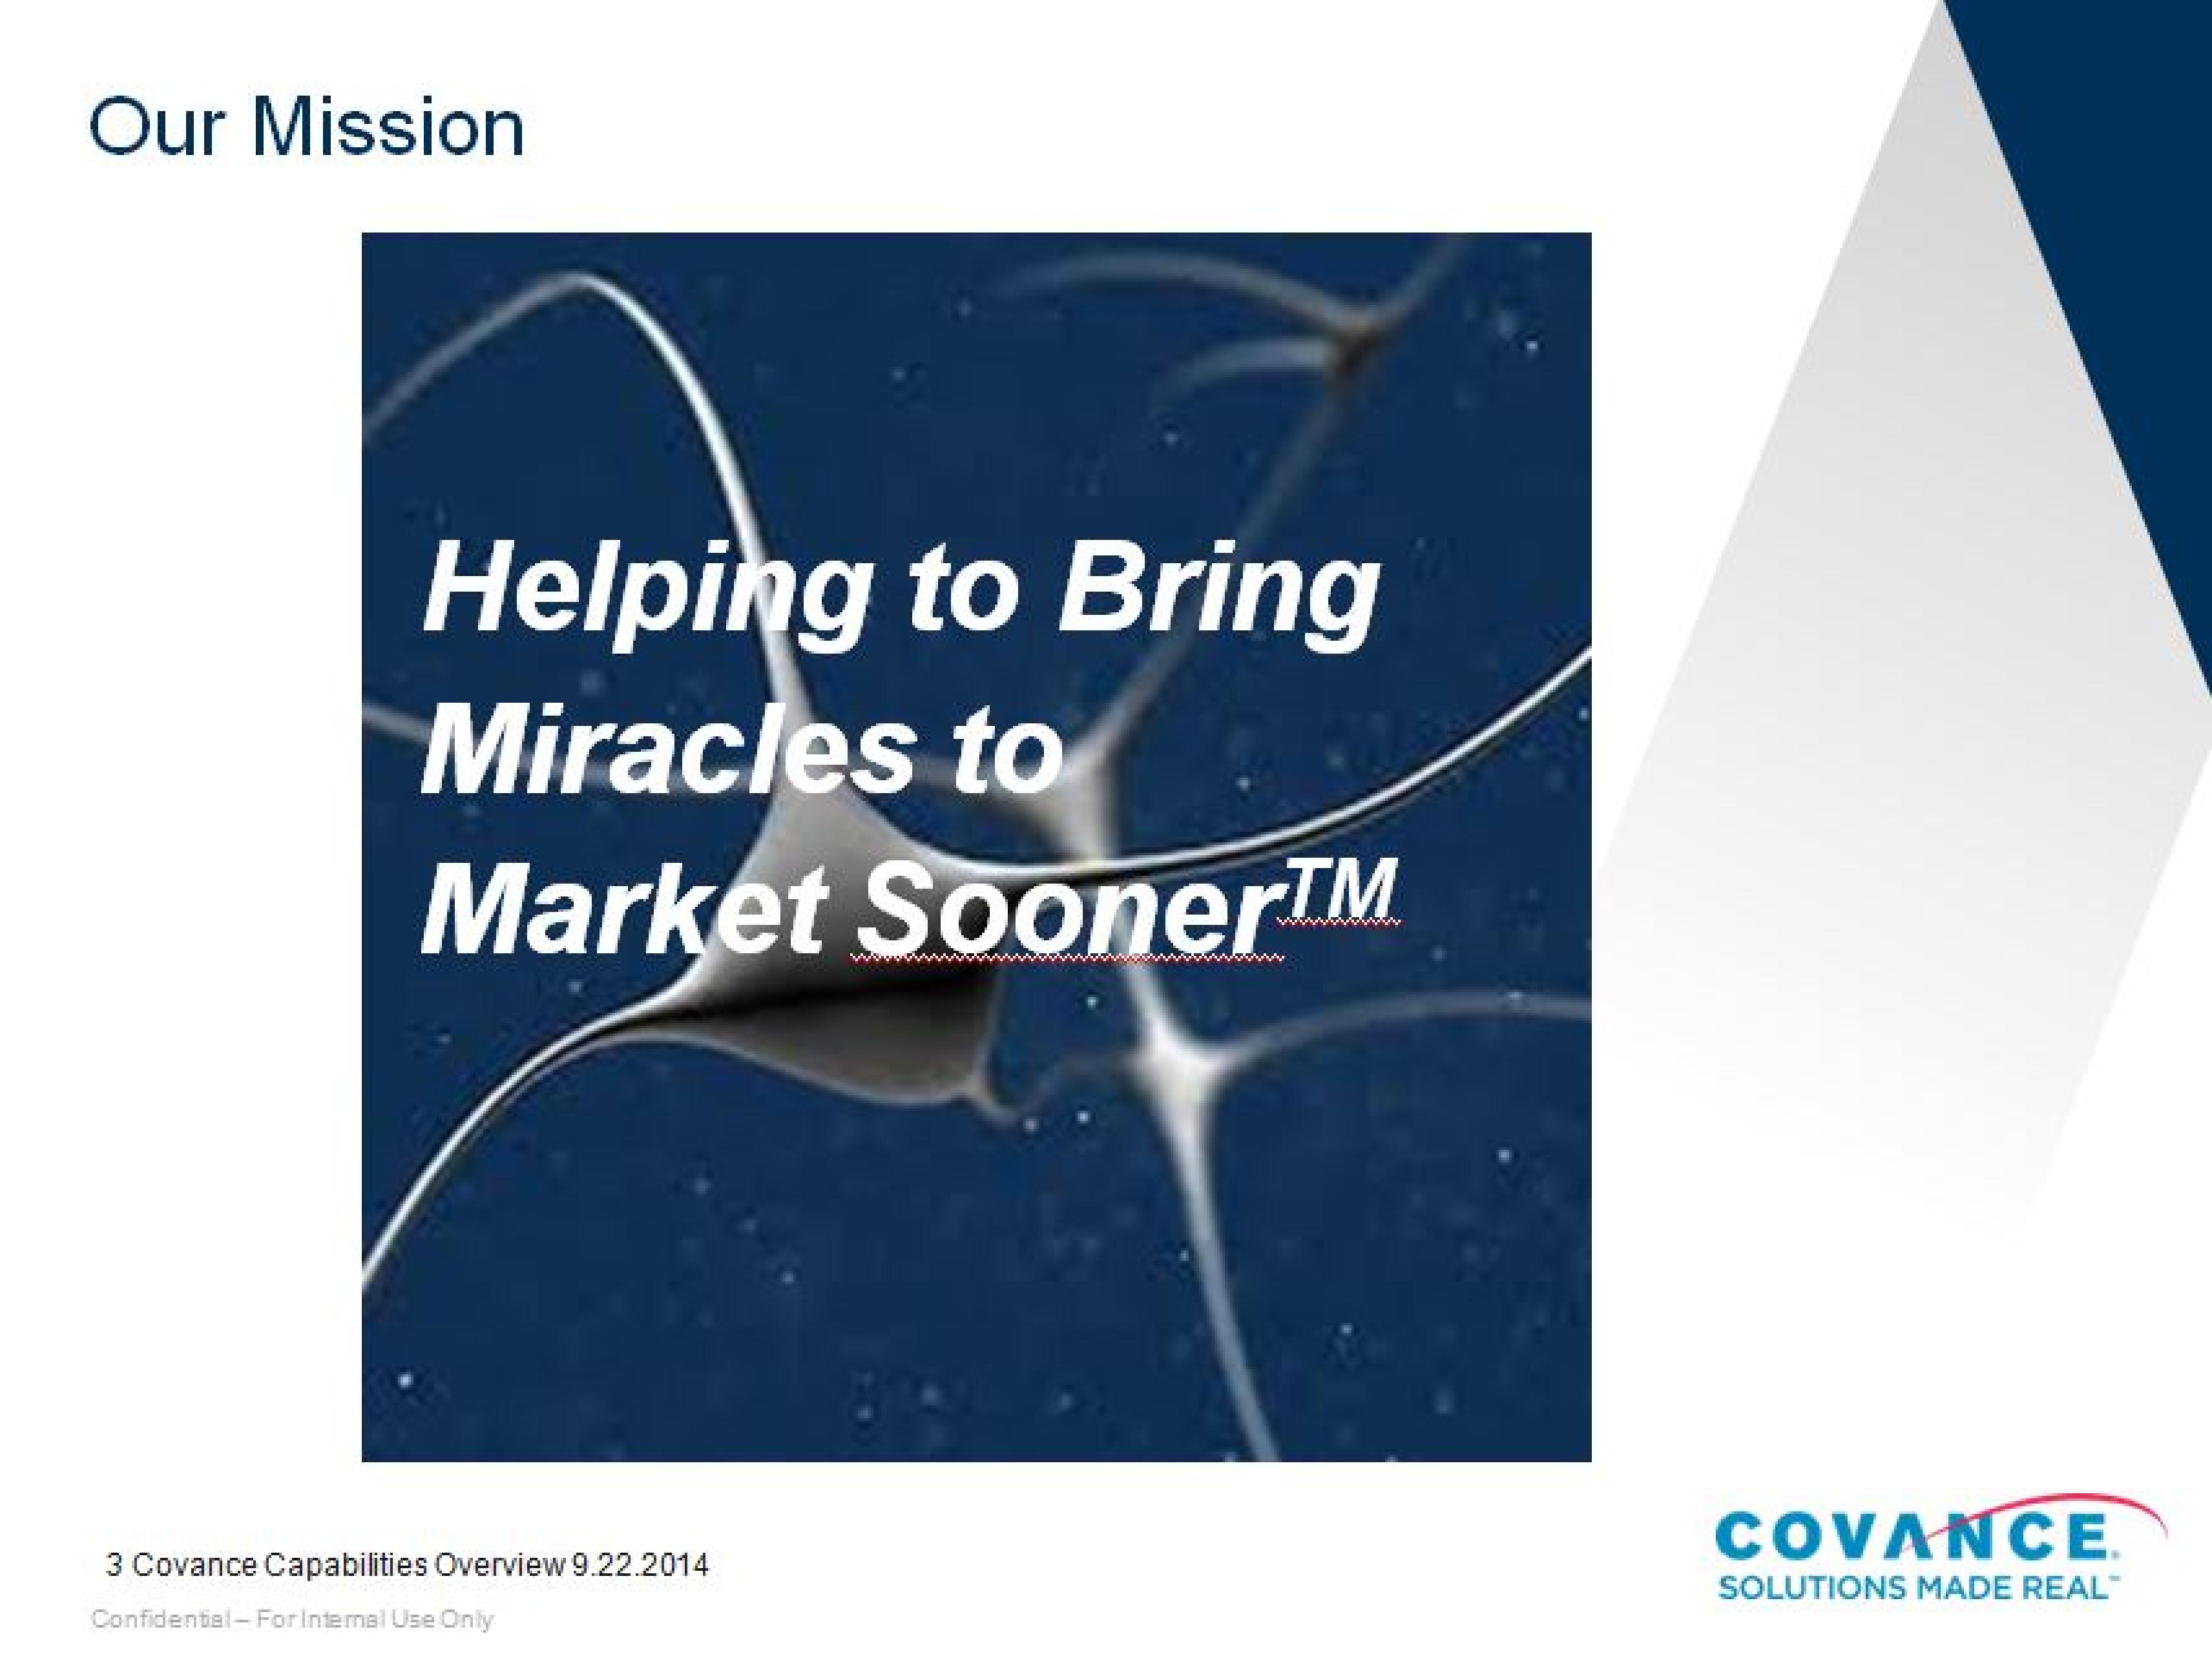  HELPING TO BRING MIRACLES TO MARKET SOONER